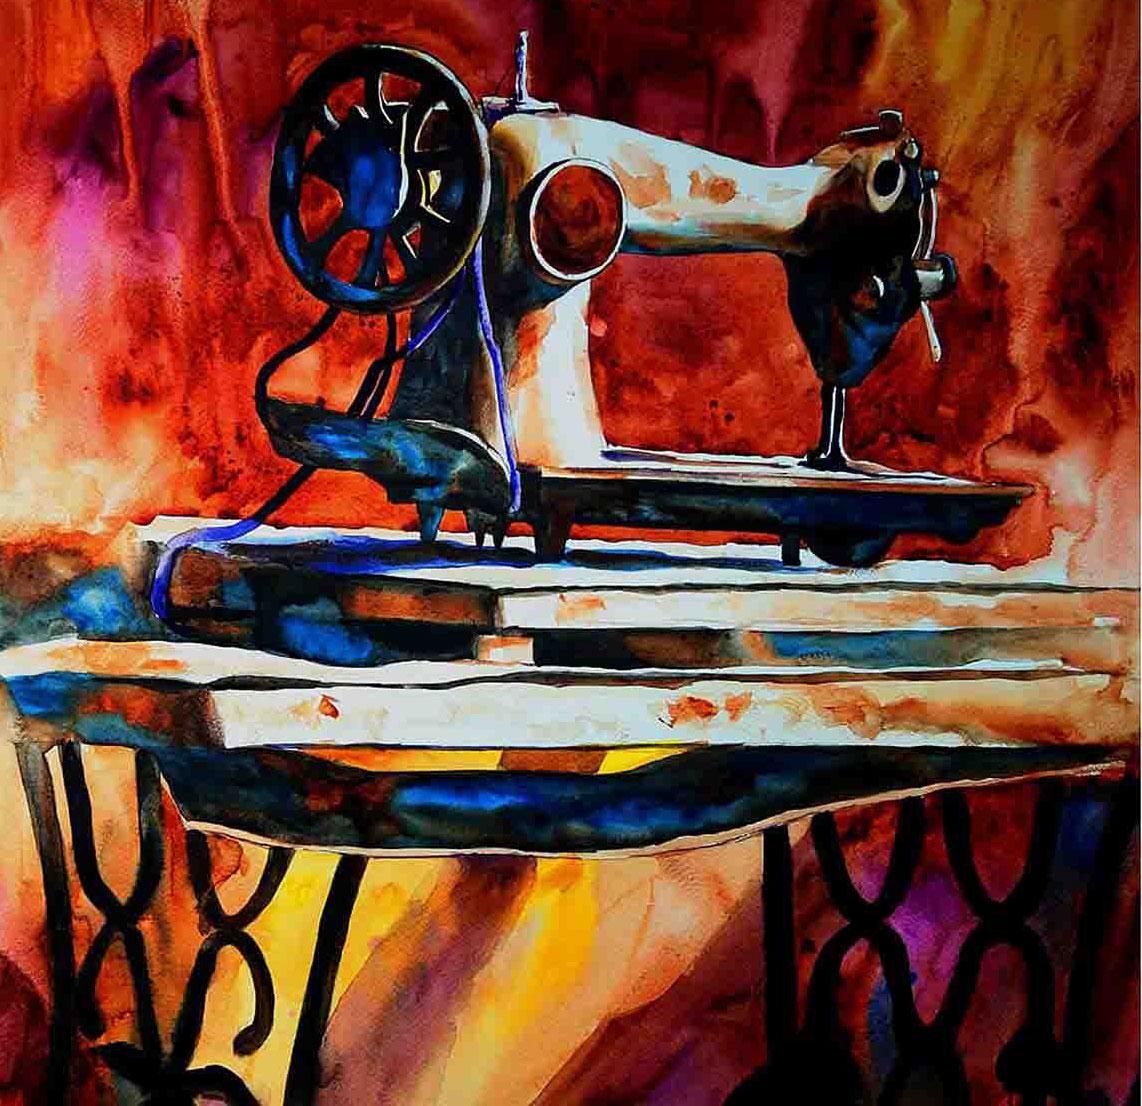 Sewing Machine, Watercolor on Paper, Red, Yellow by Indian Artist 